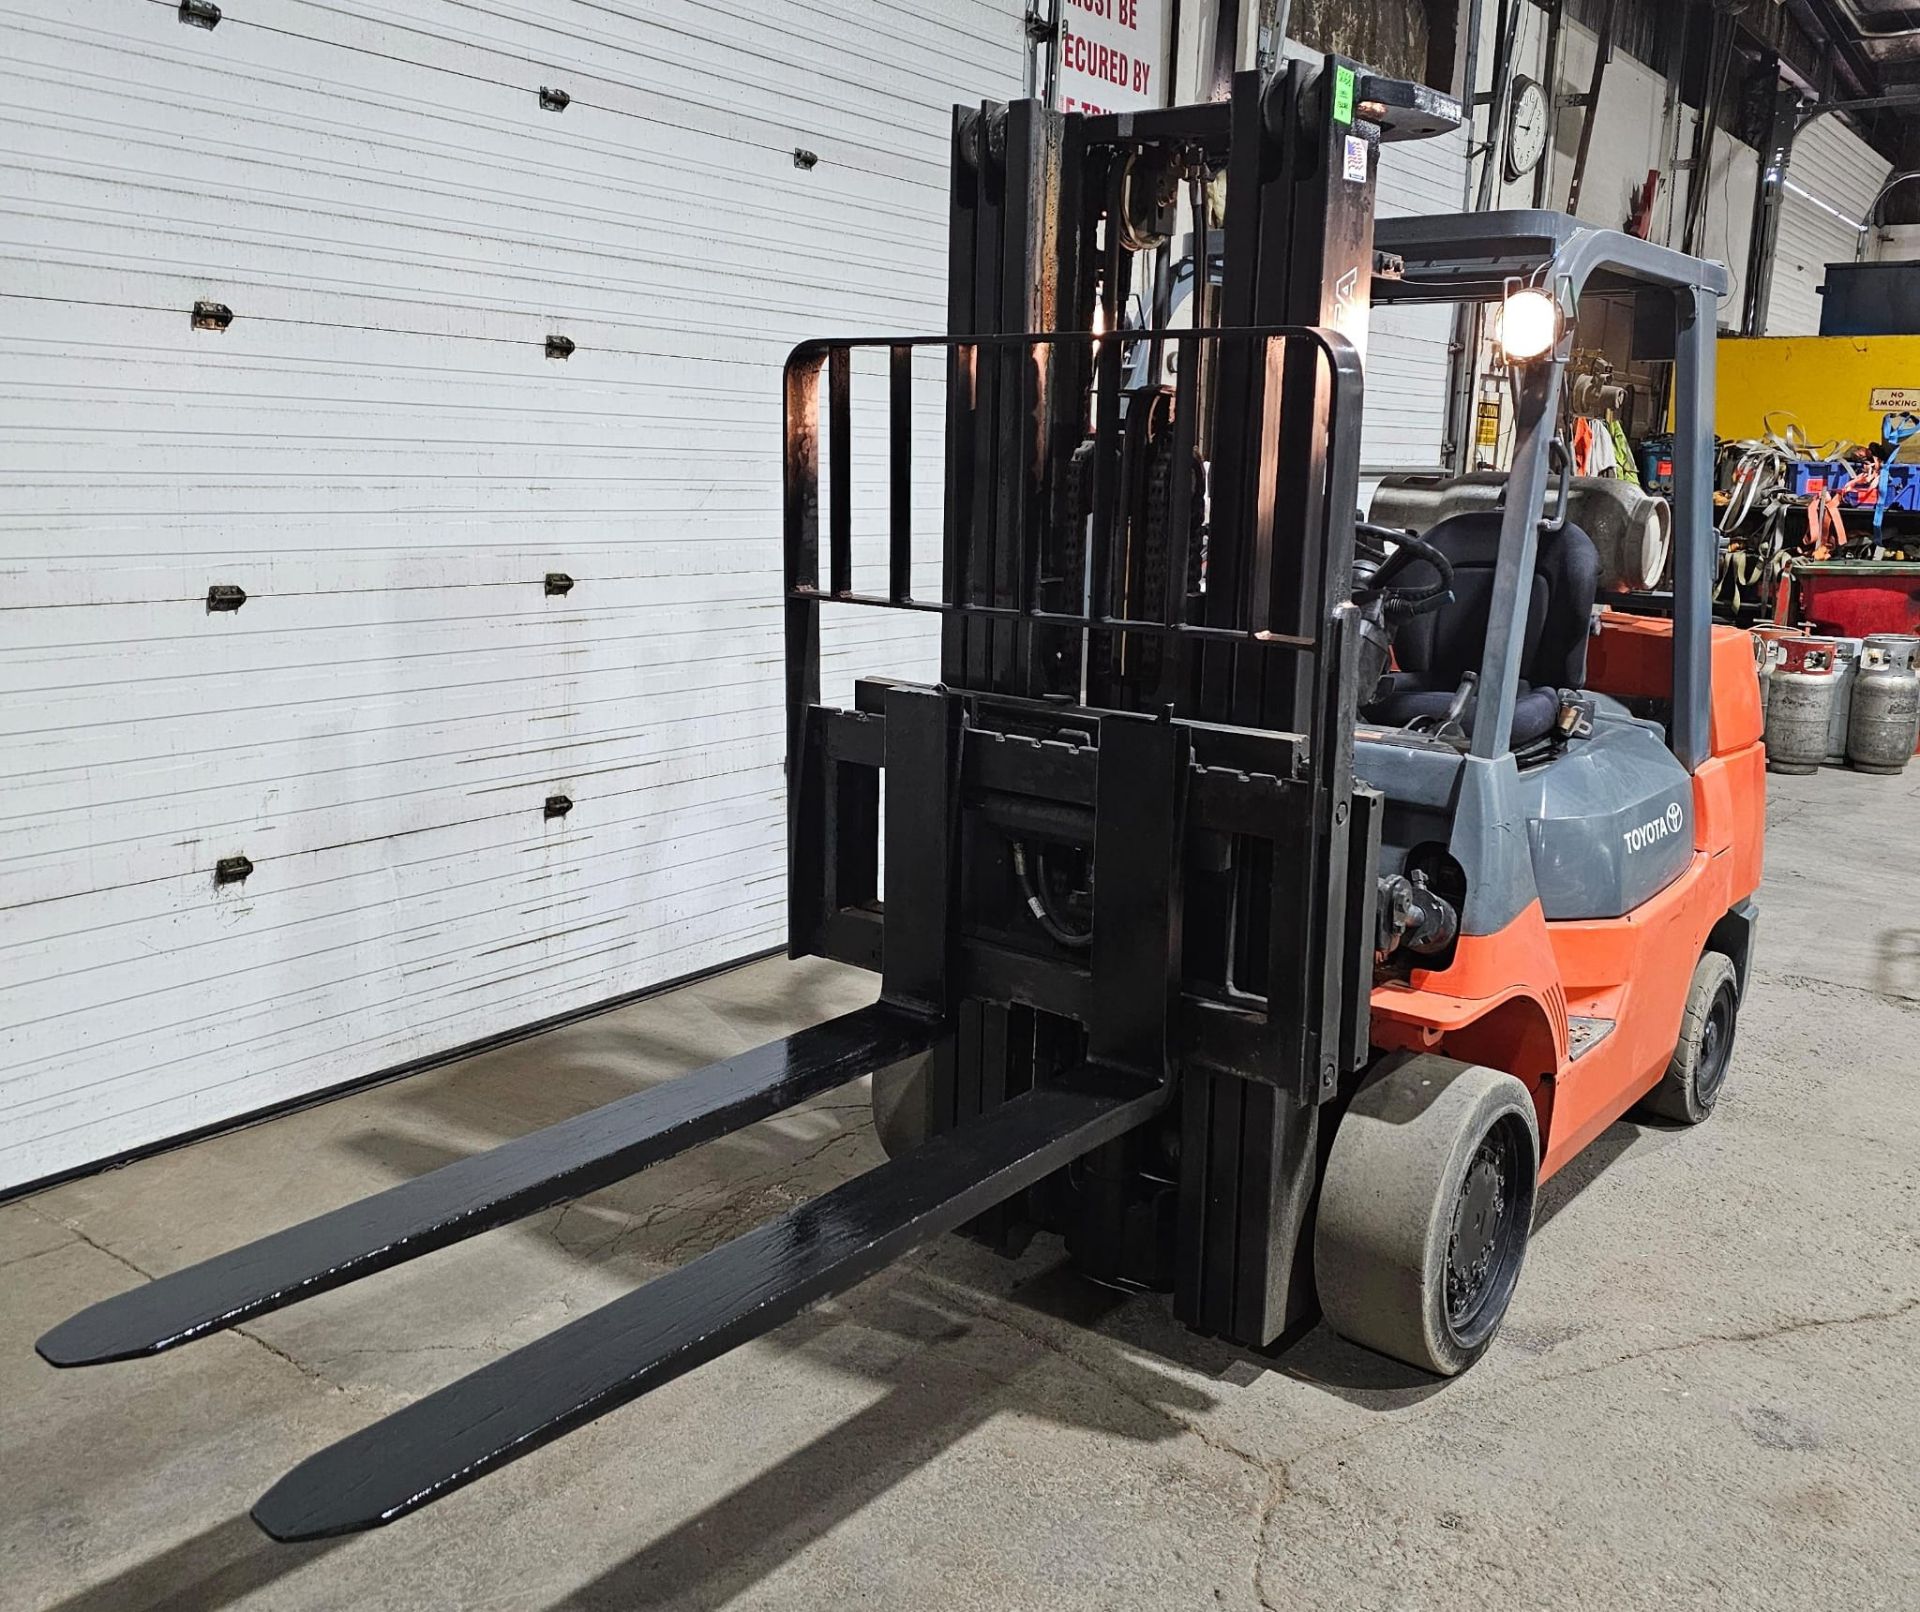 Toyota 7,000lbs Capacity LPG (Propane) Forklift with sideshift 60" Forks & 3-STAGE MAST 187" - Image 4 of 5